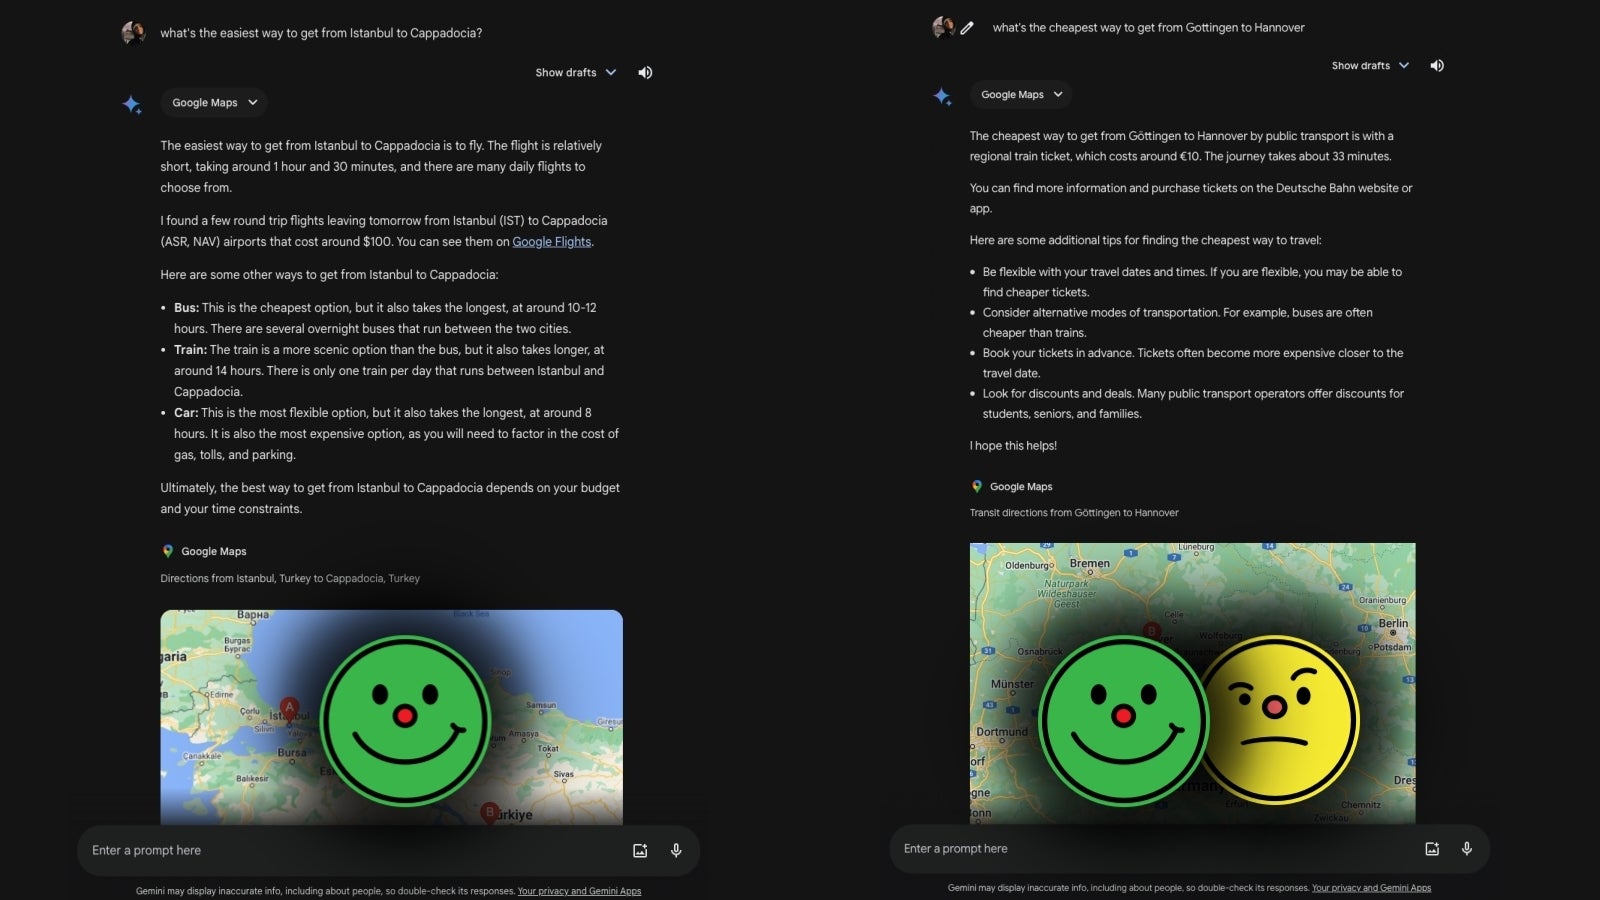 Note that for a better experience, try reading the longer version of Gemini’s responses on a larger screen. Or better - give Gemini through your browser right now! - Canceled? Google Gemini AI tells me &quot;offensive&quot; jokes about &quot;poor people&quot; - but that&#039;s only human